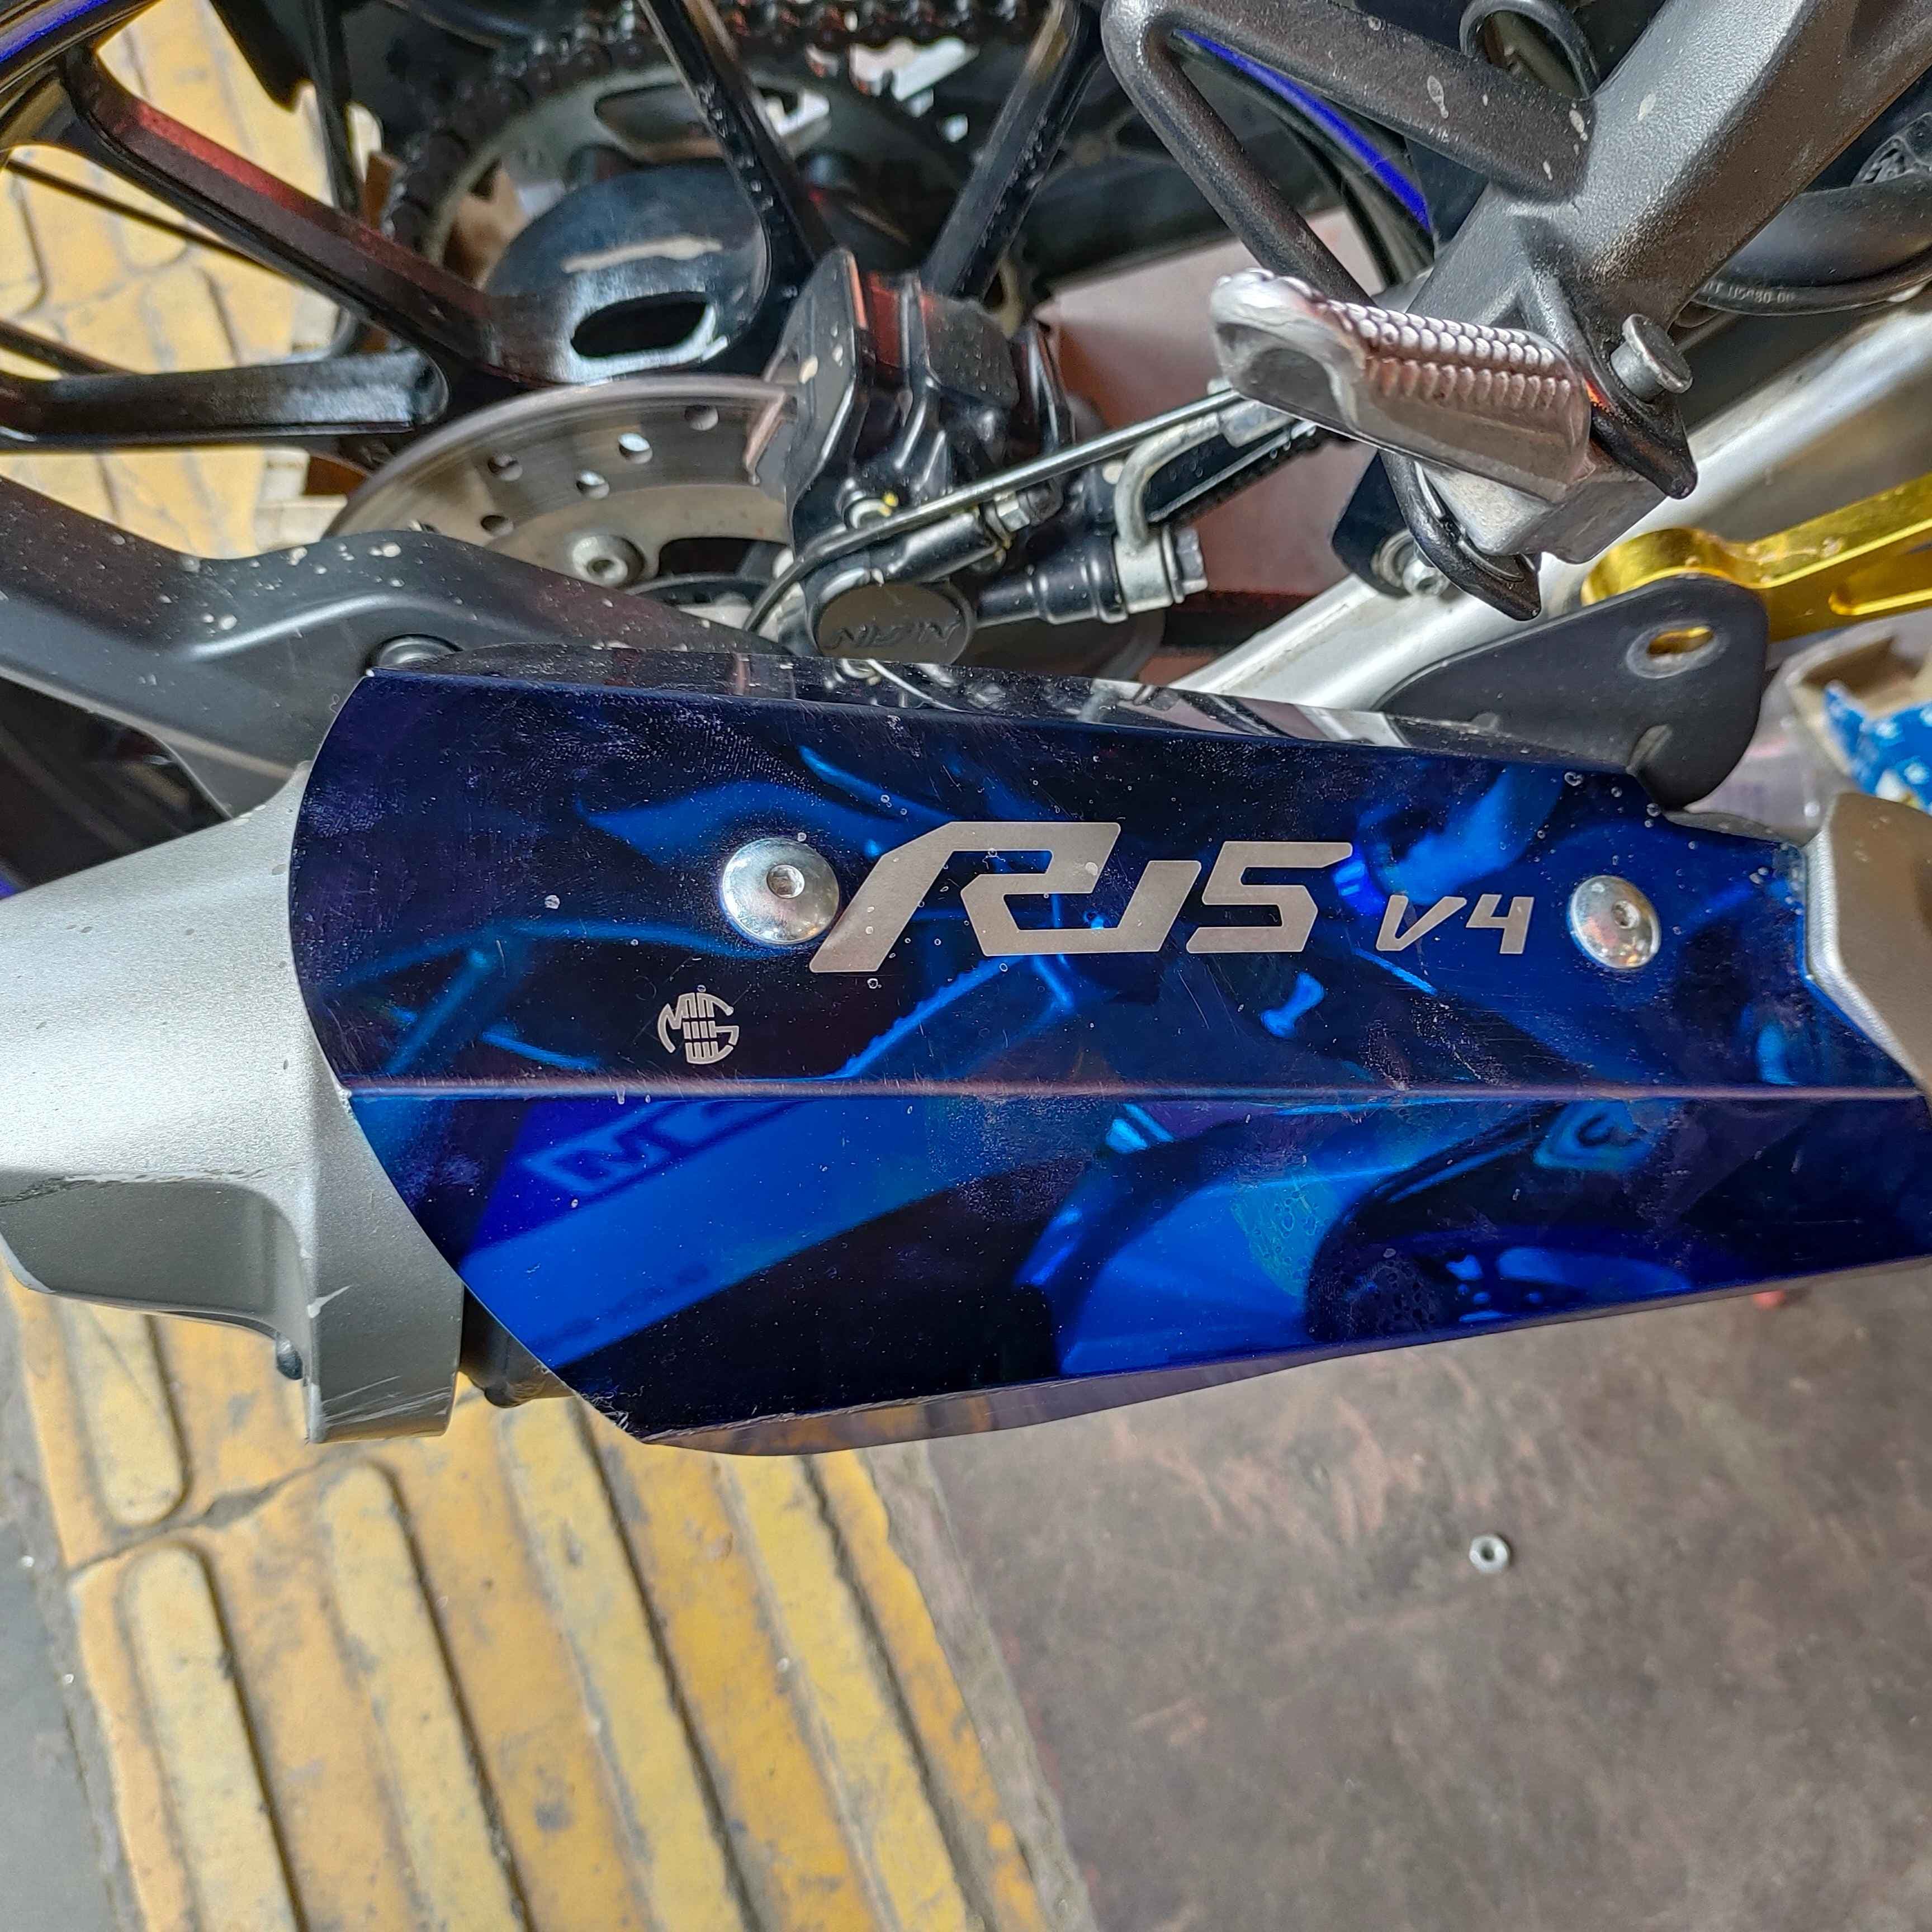 Exhaust Cover for R15V4